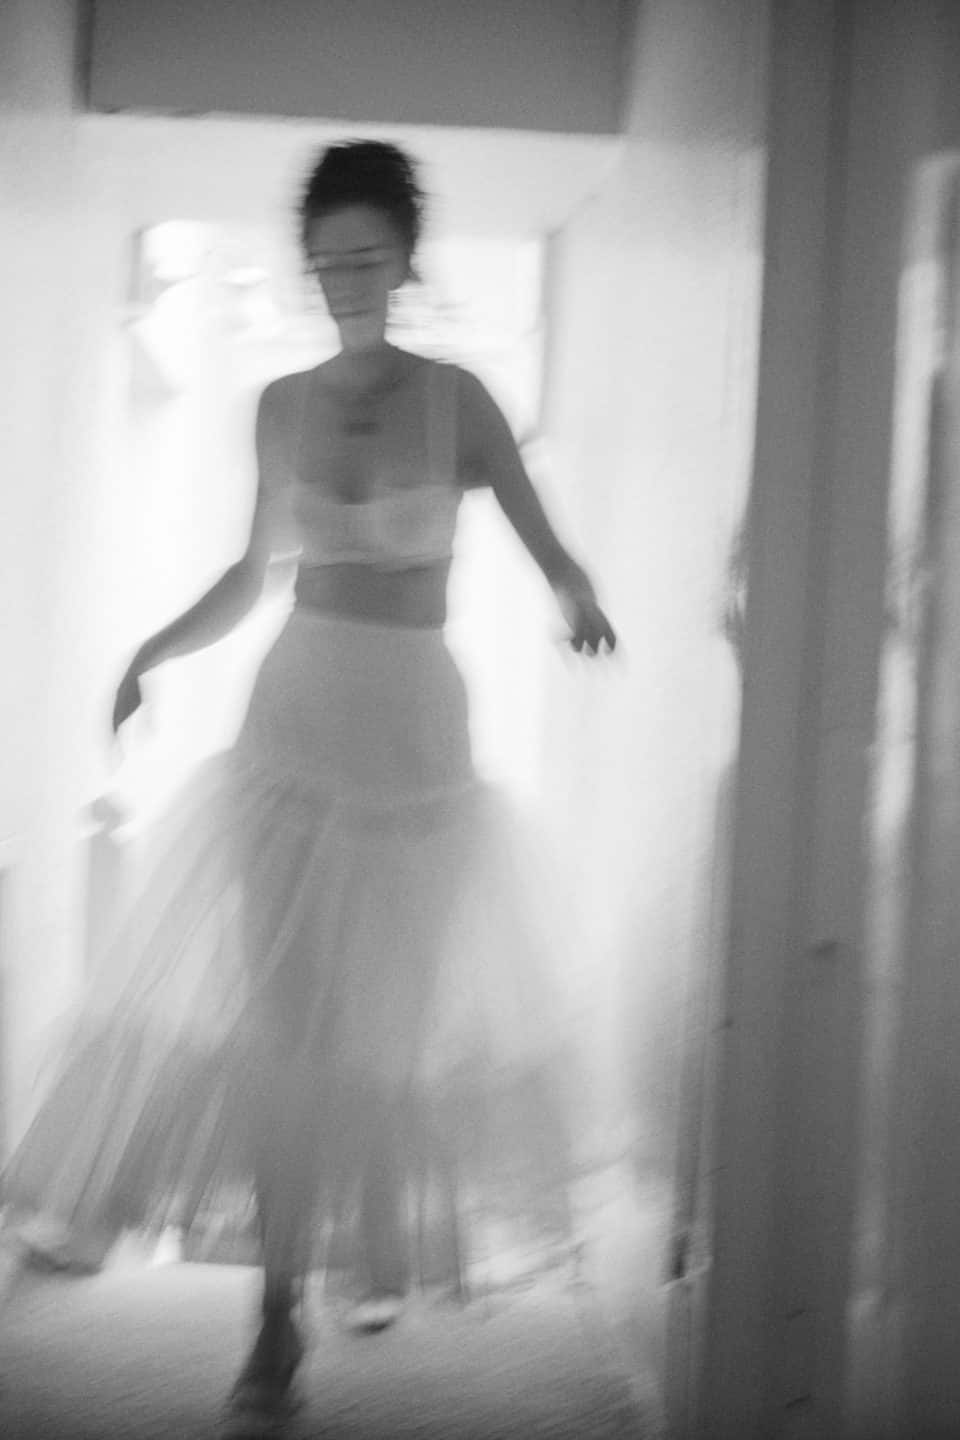 John Dolan’s Photographs Capture the Art and Soul of a Wedding Day